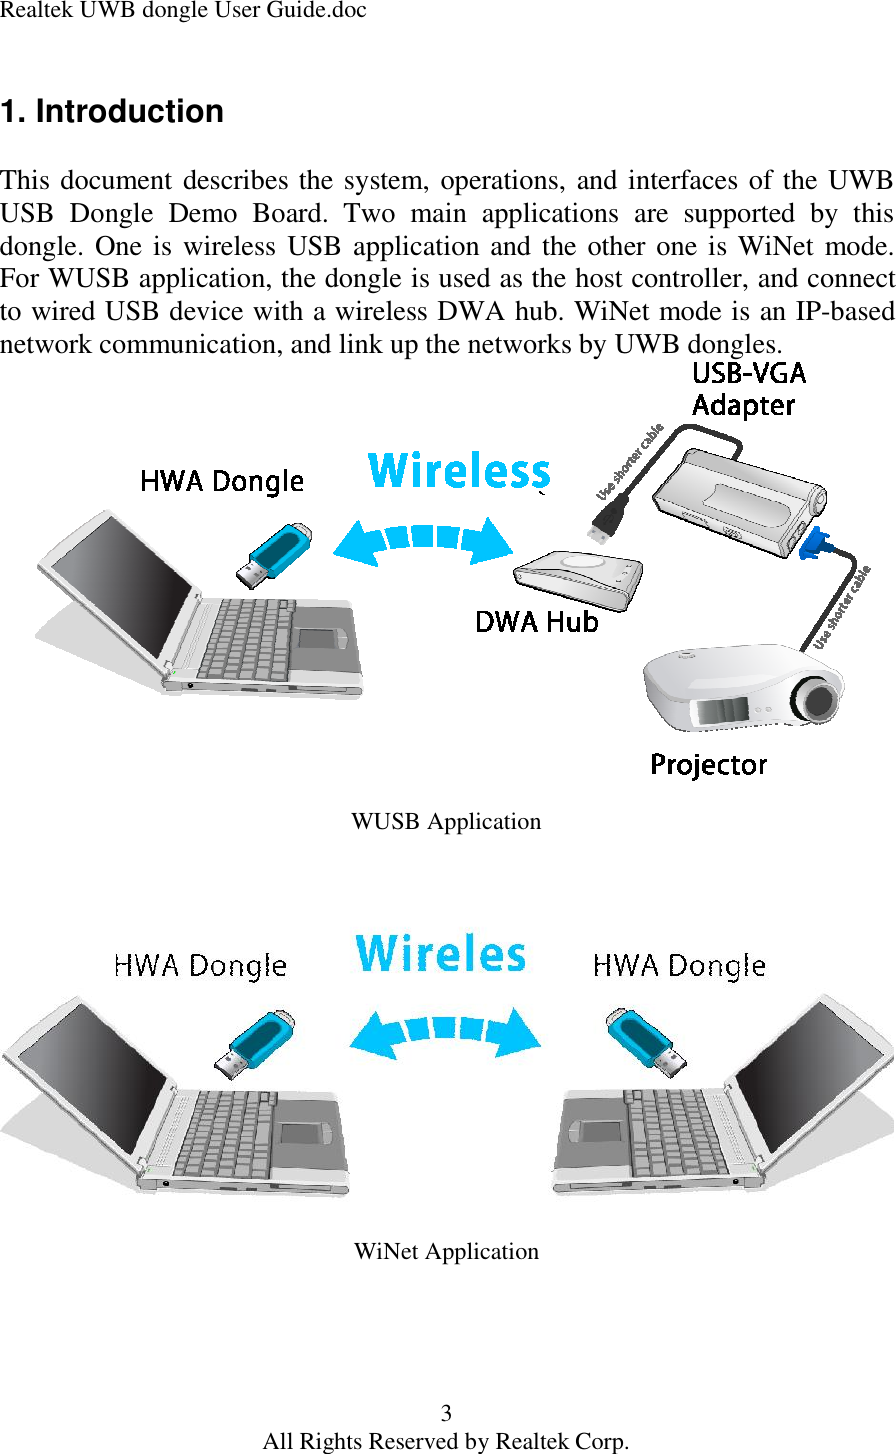 Realtek UWB dongle User Guide.doc 3 All Rights Reserved by Realtek Corp. 1. Introduction  This document describes the system, operations, and interfaces of the UWB USB Dongle Demo Board. Two main applications are supported by this dongle. One is wireless USB application and the other one is WiNet mode. For WUSB application, the dongle is used as the host controller, and connect to wired USB device with a wireless DWA hub. WiNet mode is an IP-based network communication, and link up the networks by UWB dongles.                 WUSB Application WiNet Application     